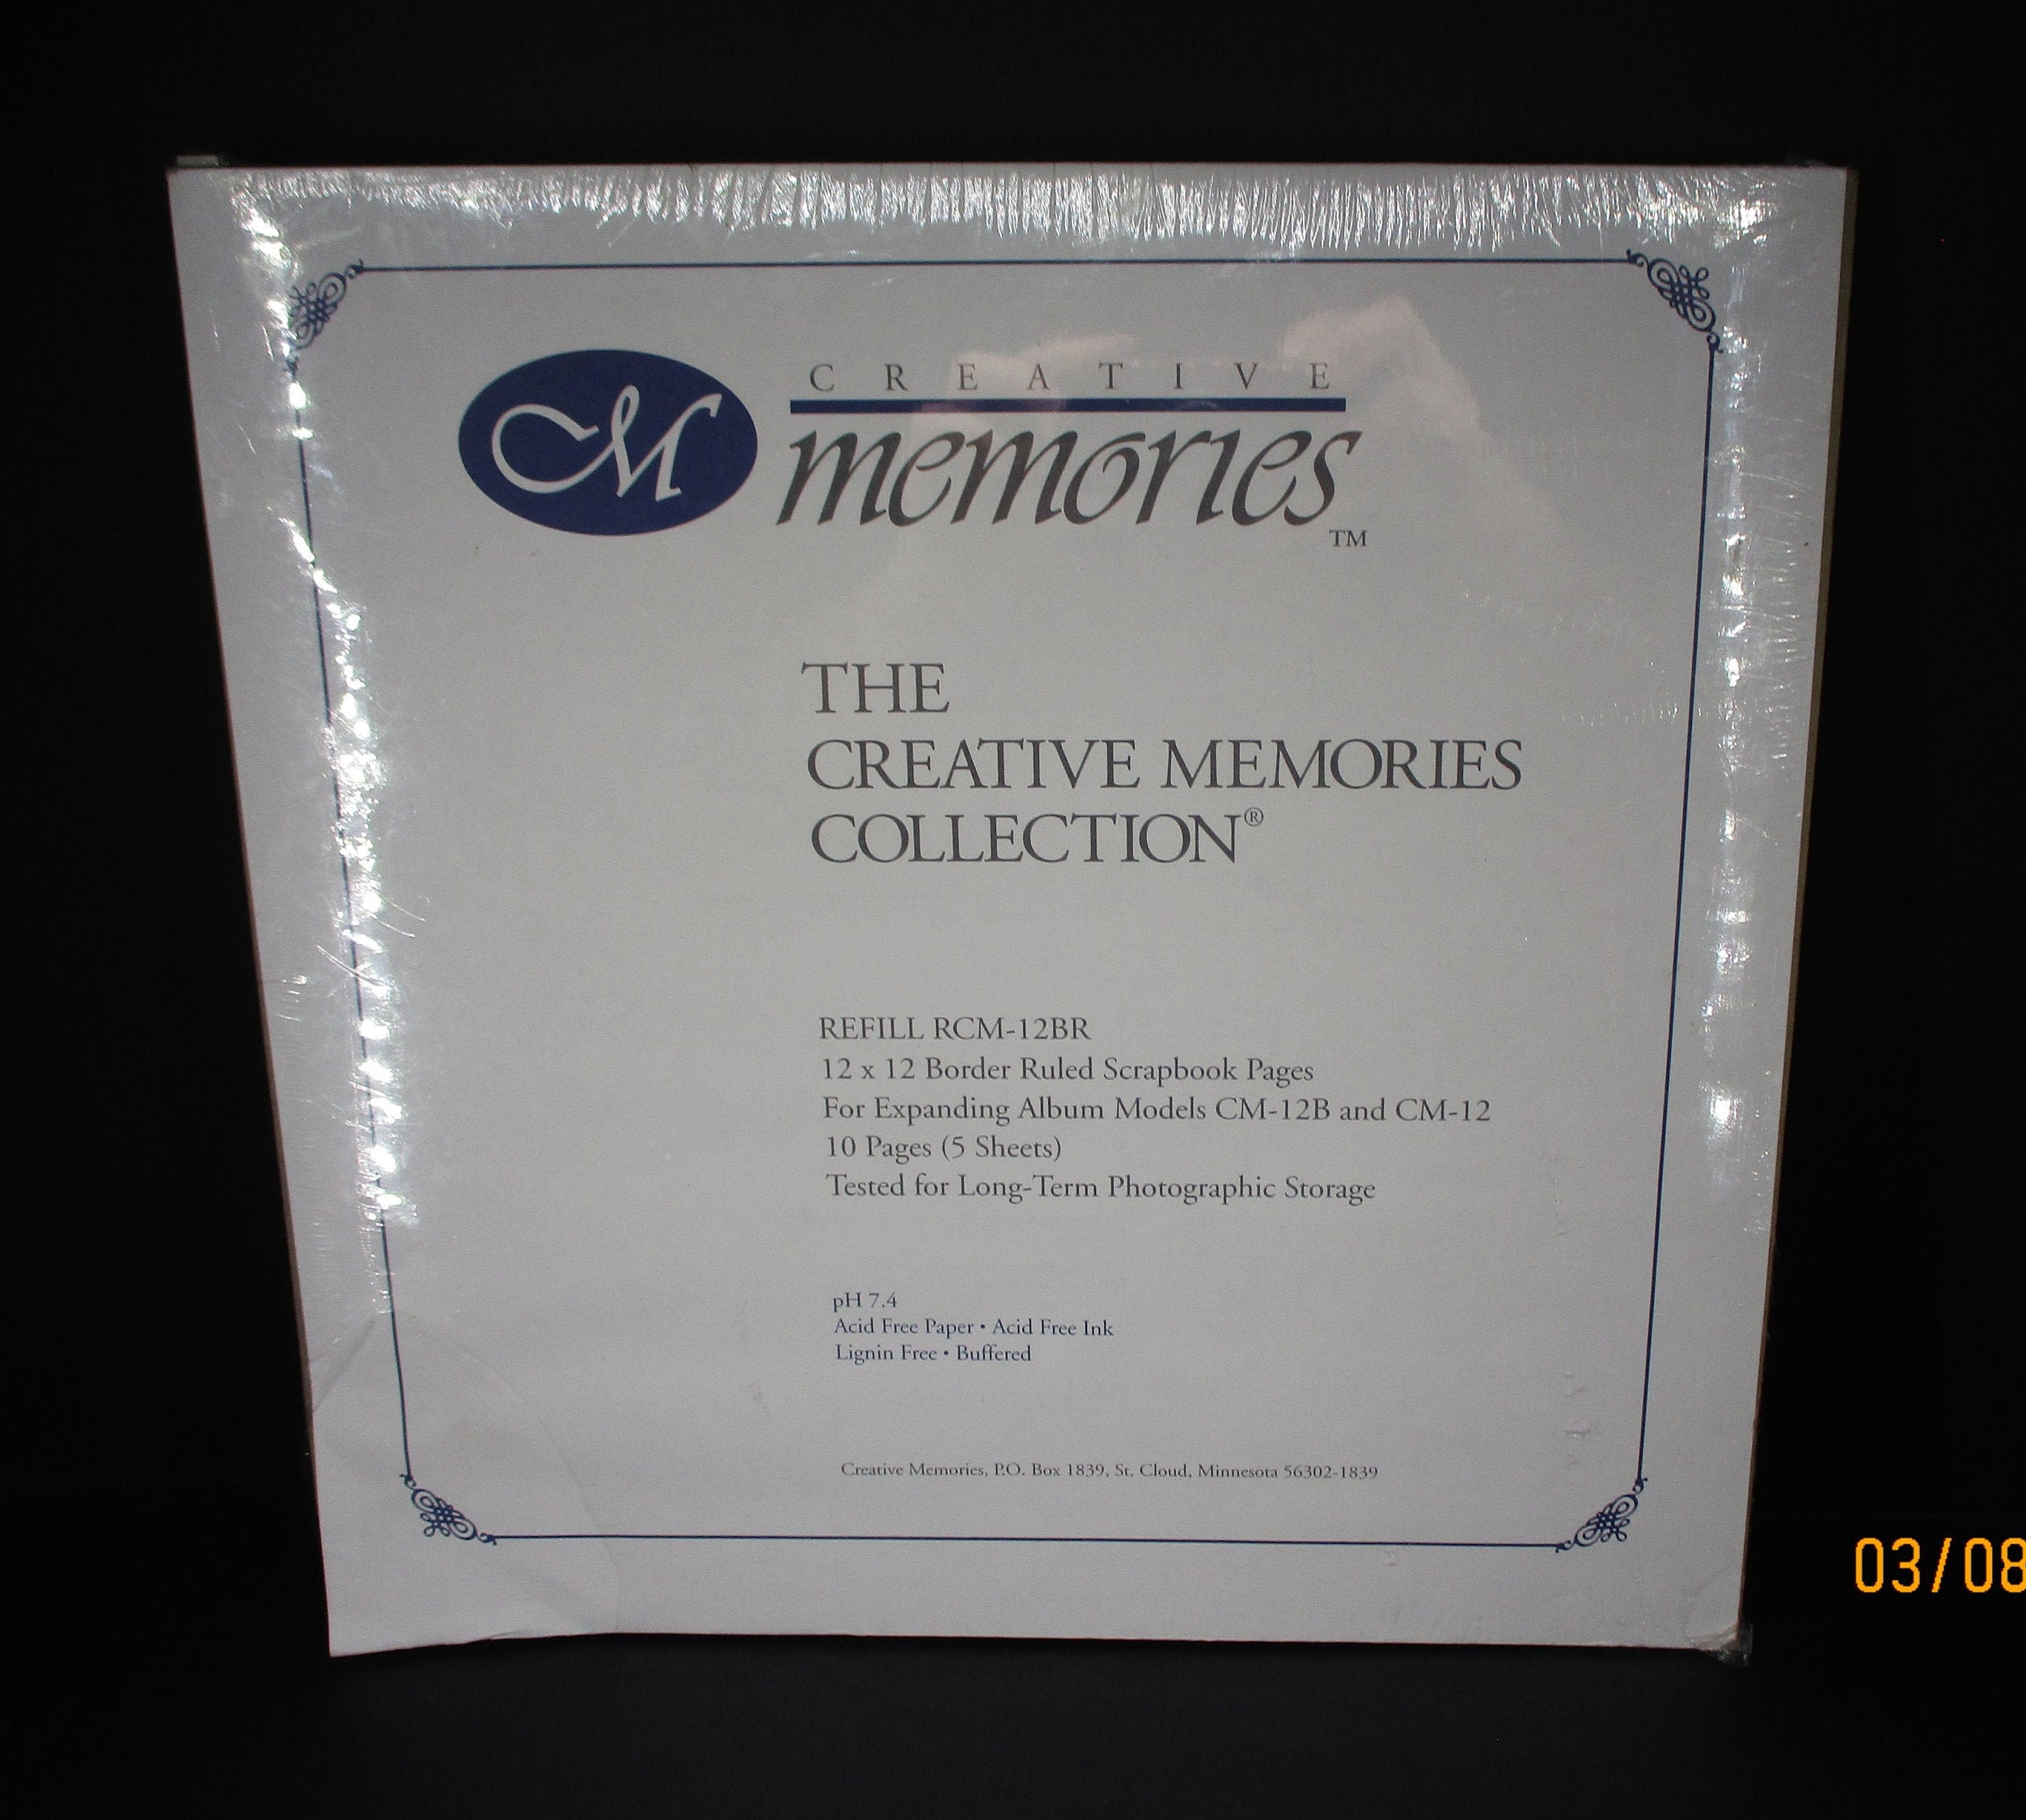 Creative Memories 12x12 Black Ruled Scrapbook Pages Refill RCM-12BR 